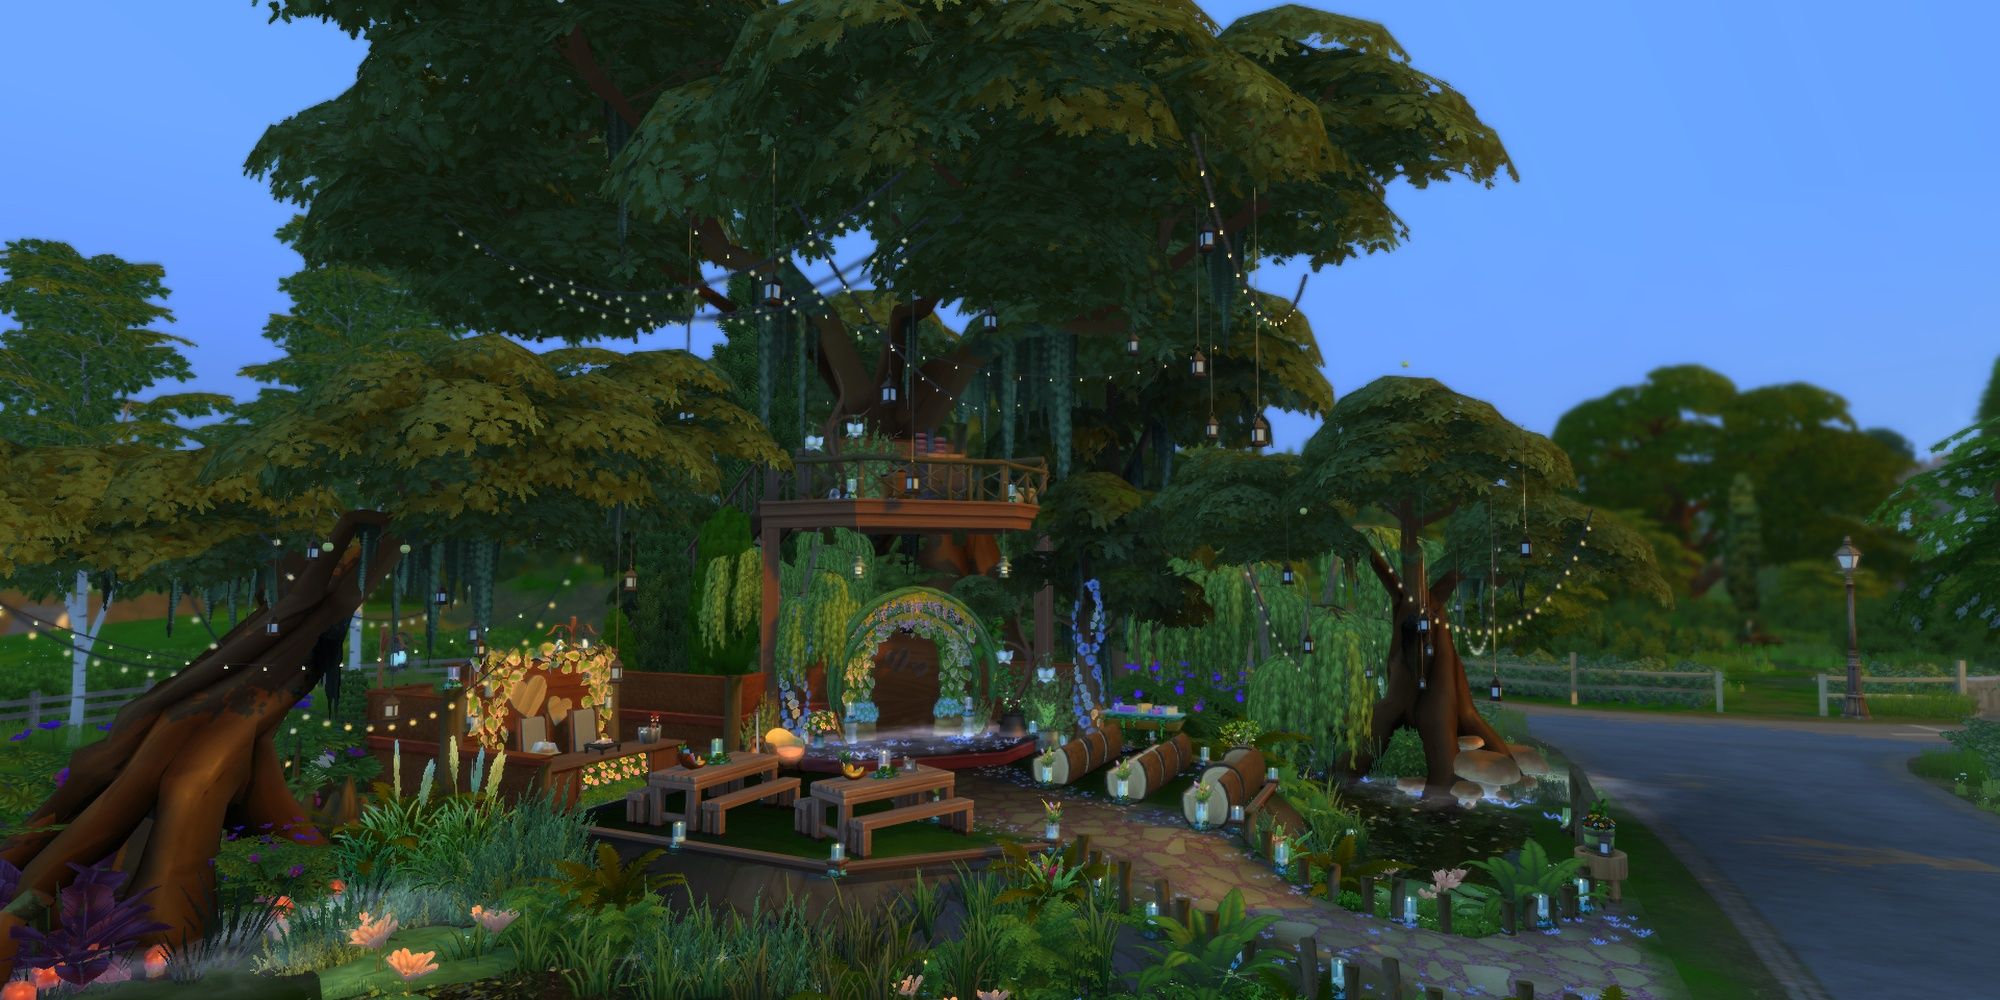 A wedding venue from The Sims 4 full of densely packed trees and plants.